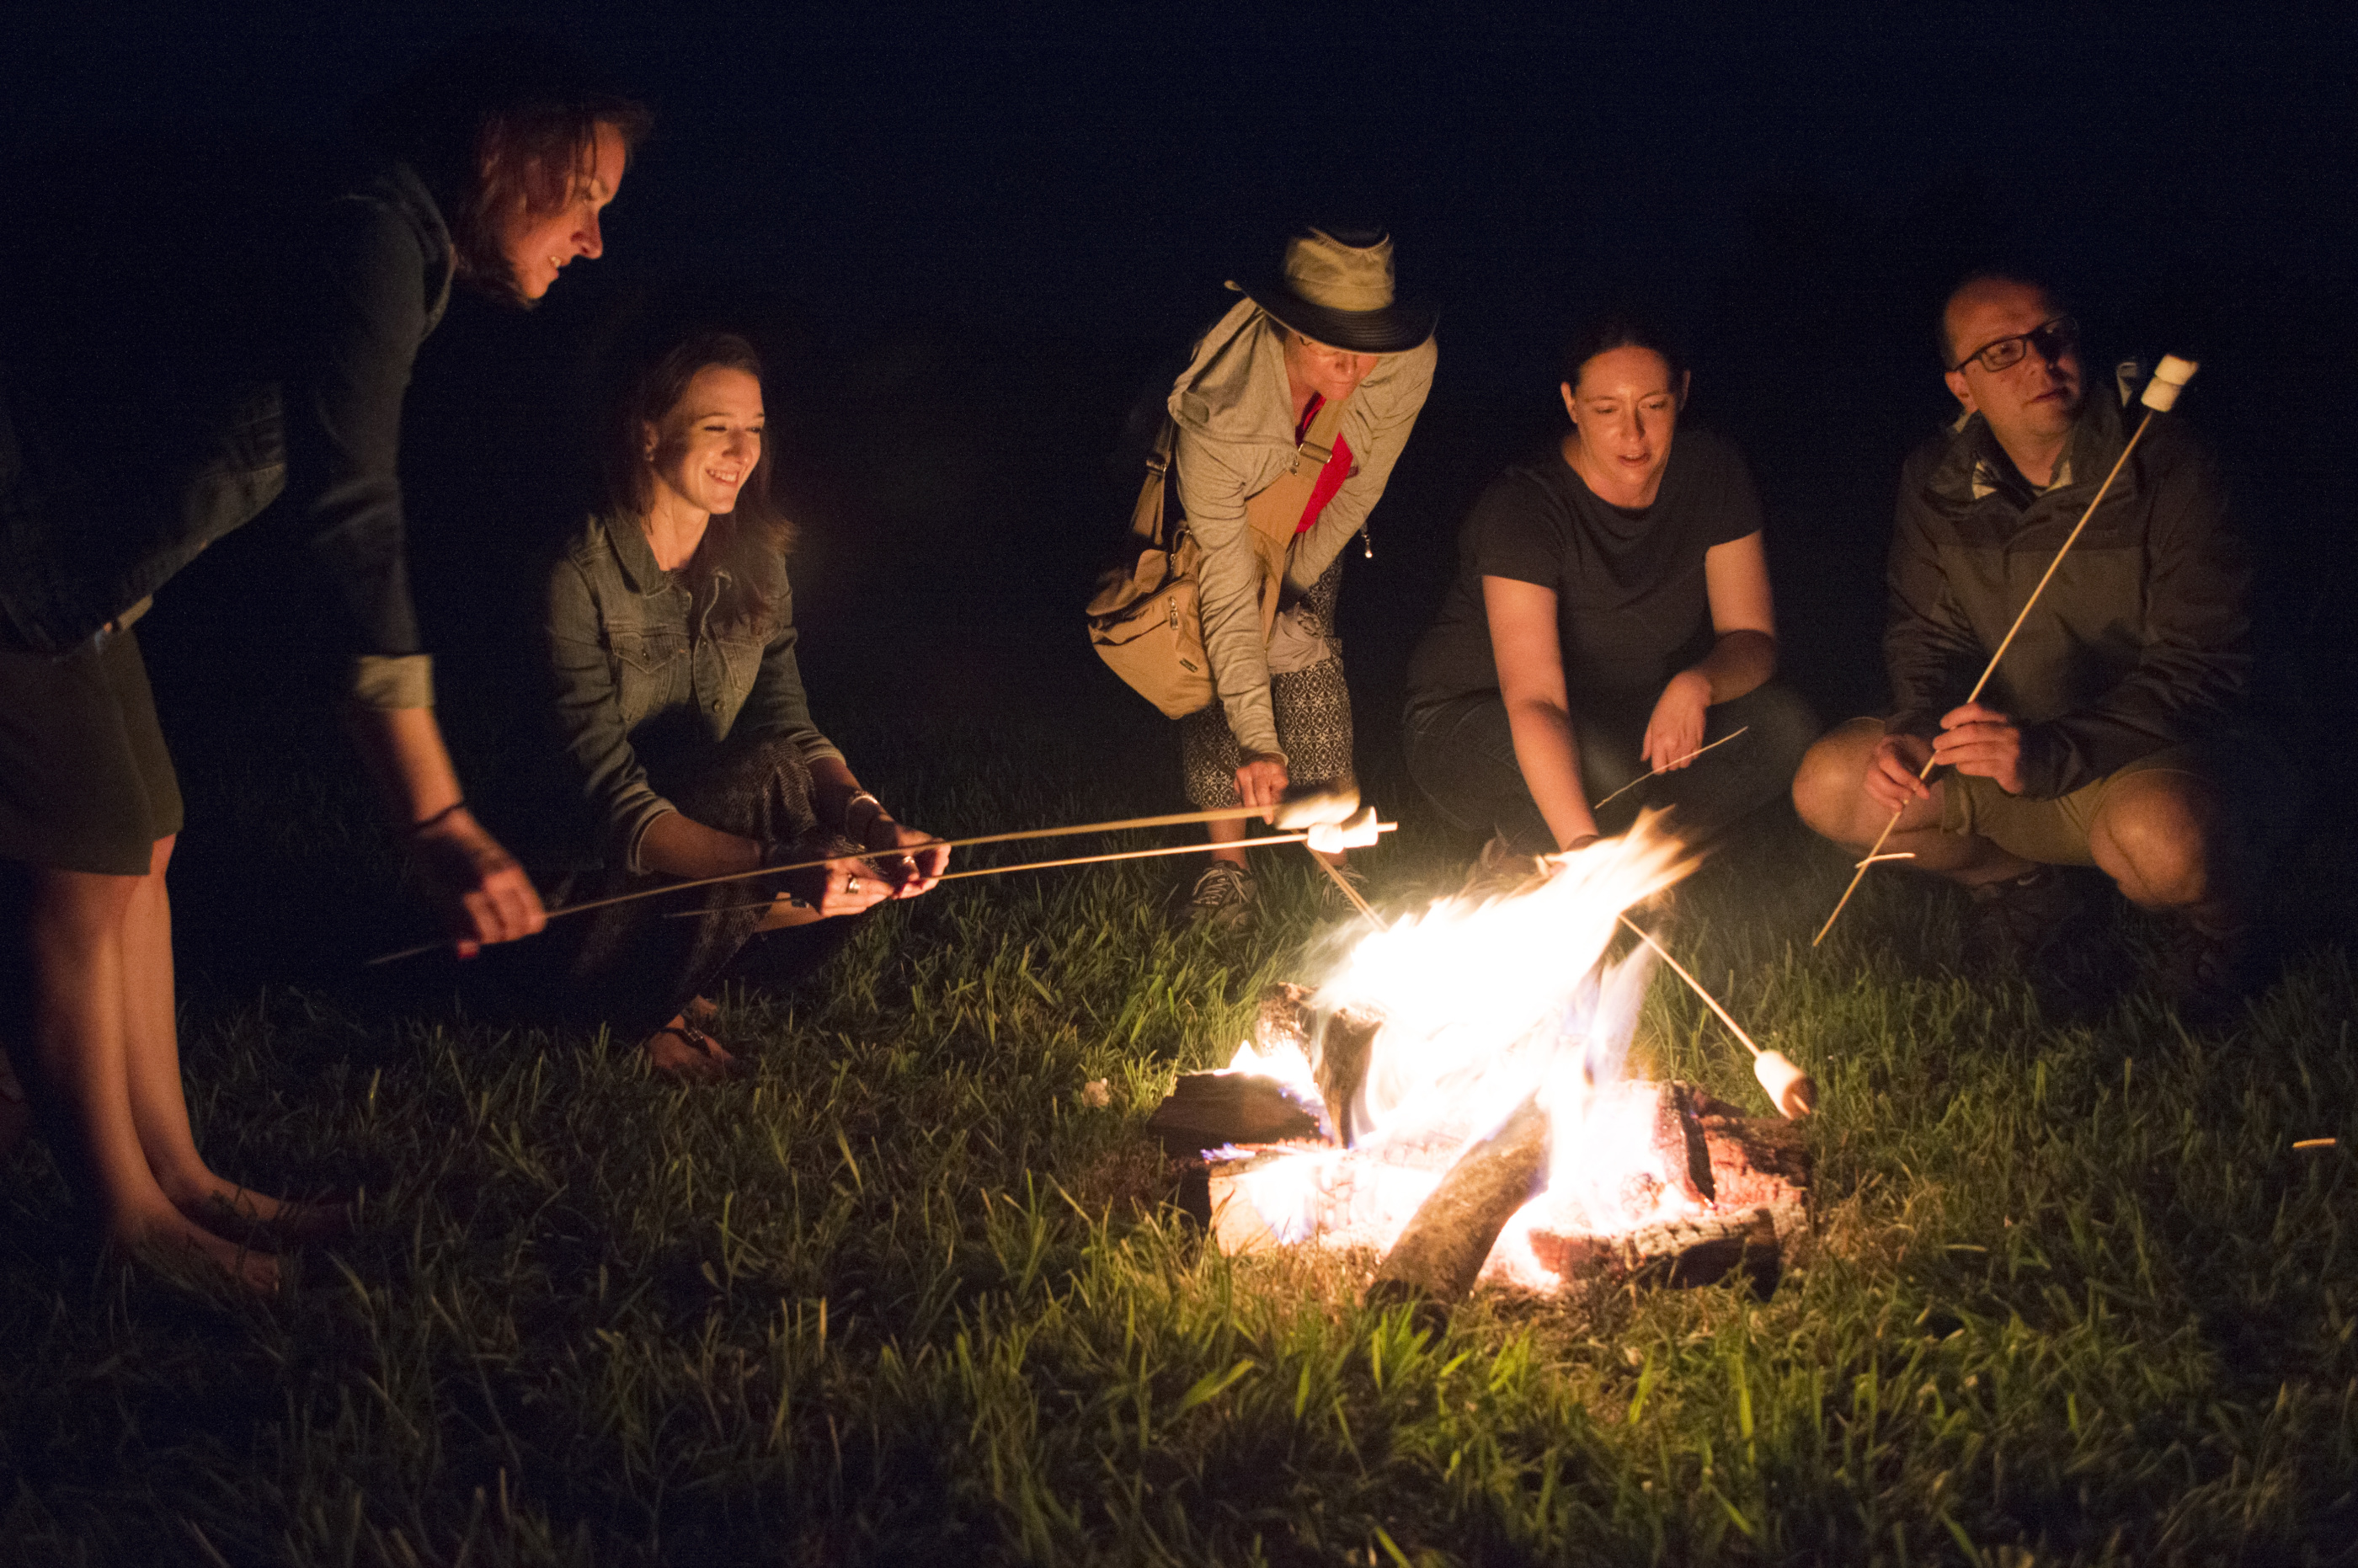 A groupd of people roast marshmellows on a fire outdoors at night